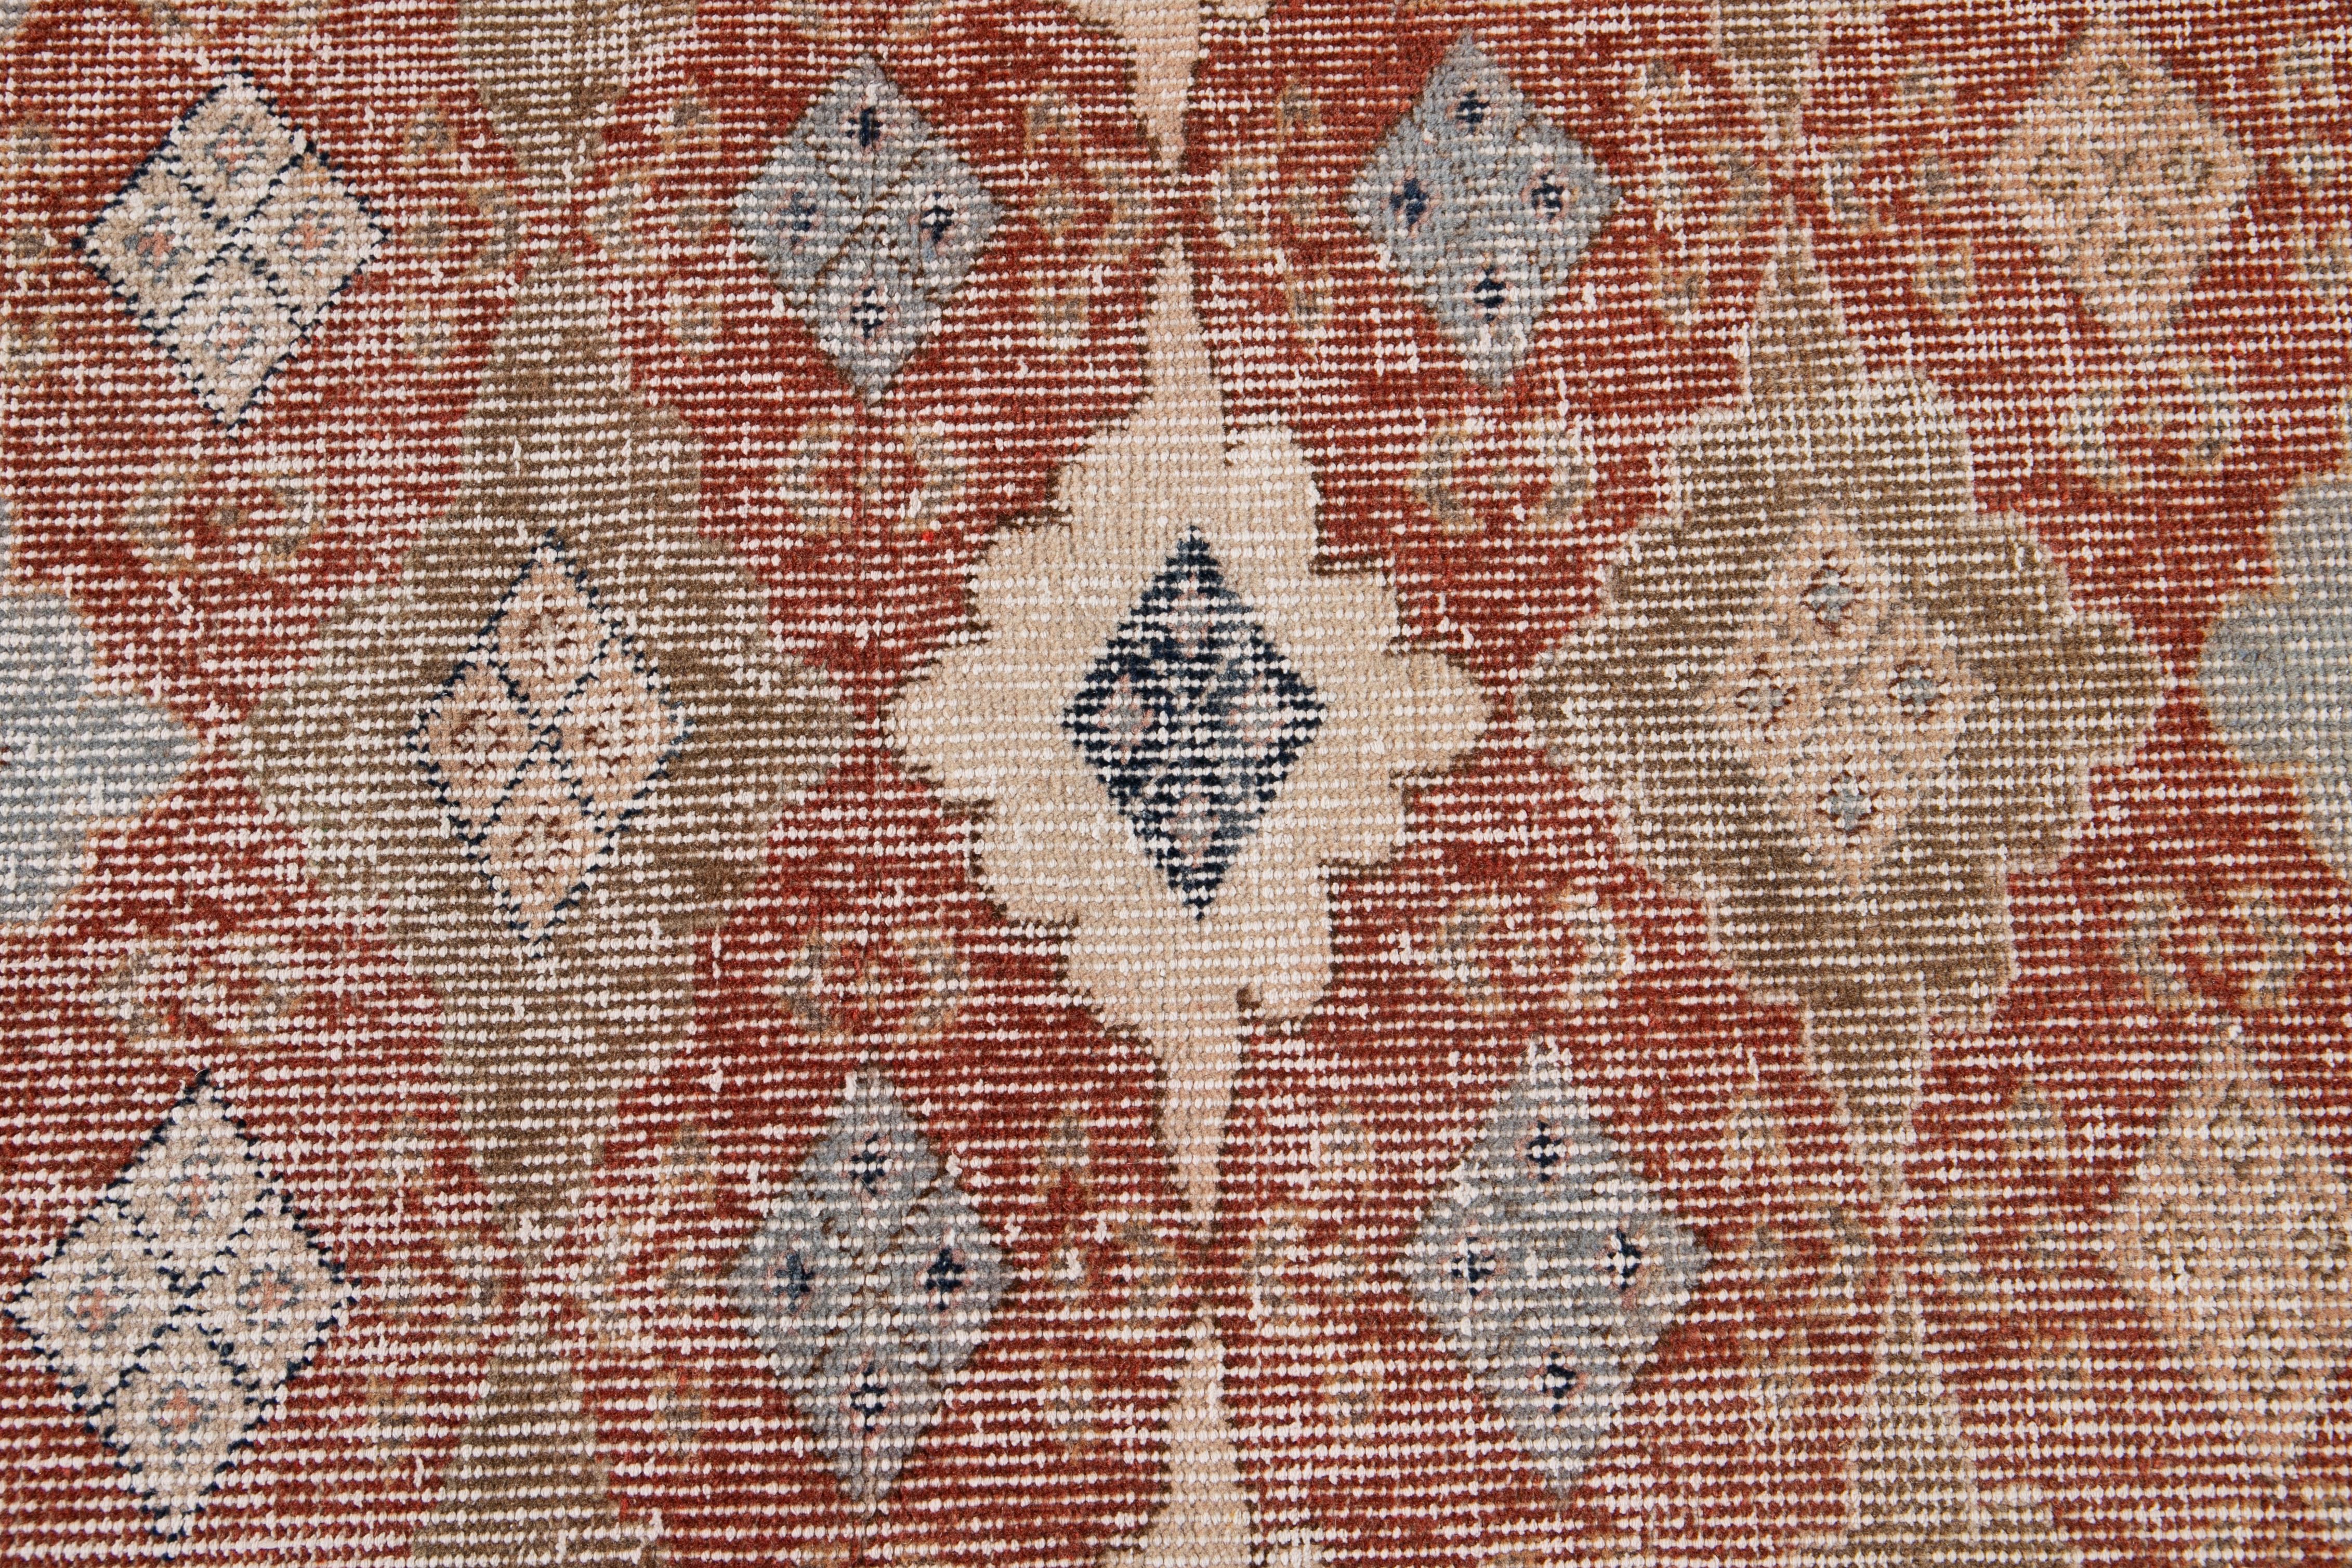 Hand-Knotted Floral Hanmdade Vintage Turkish Scatter Wool Rug In Rust For Sale